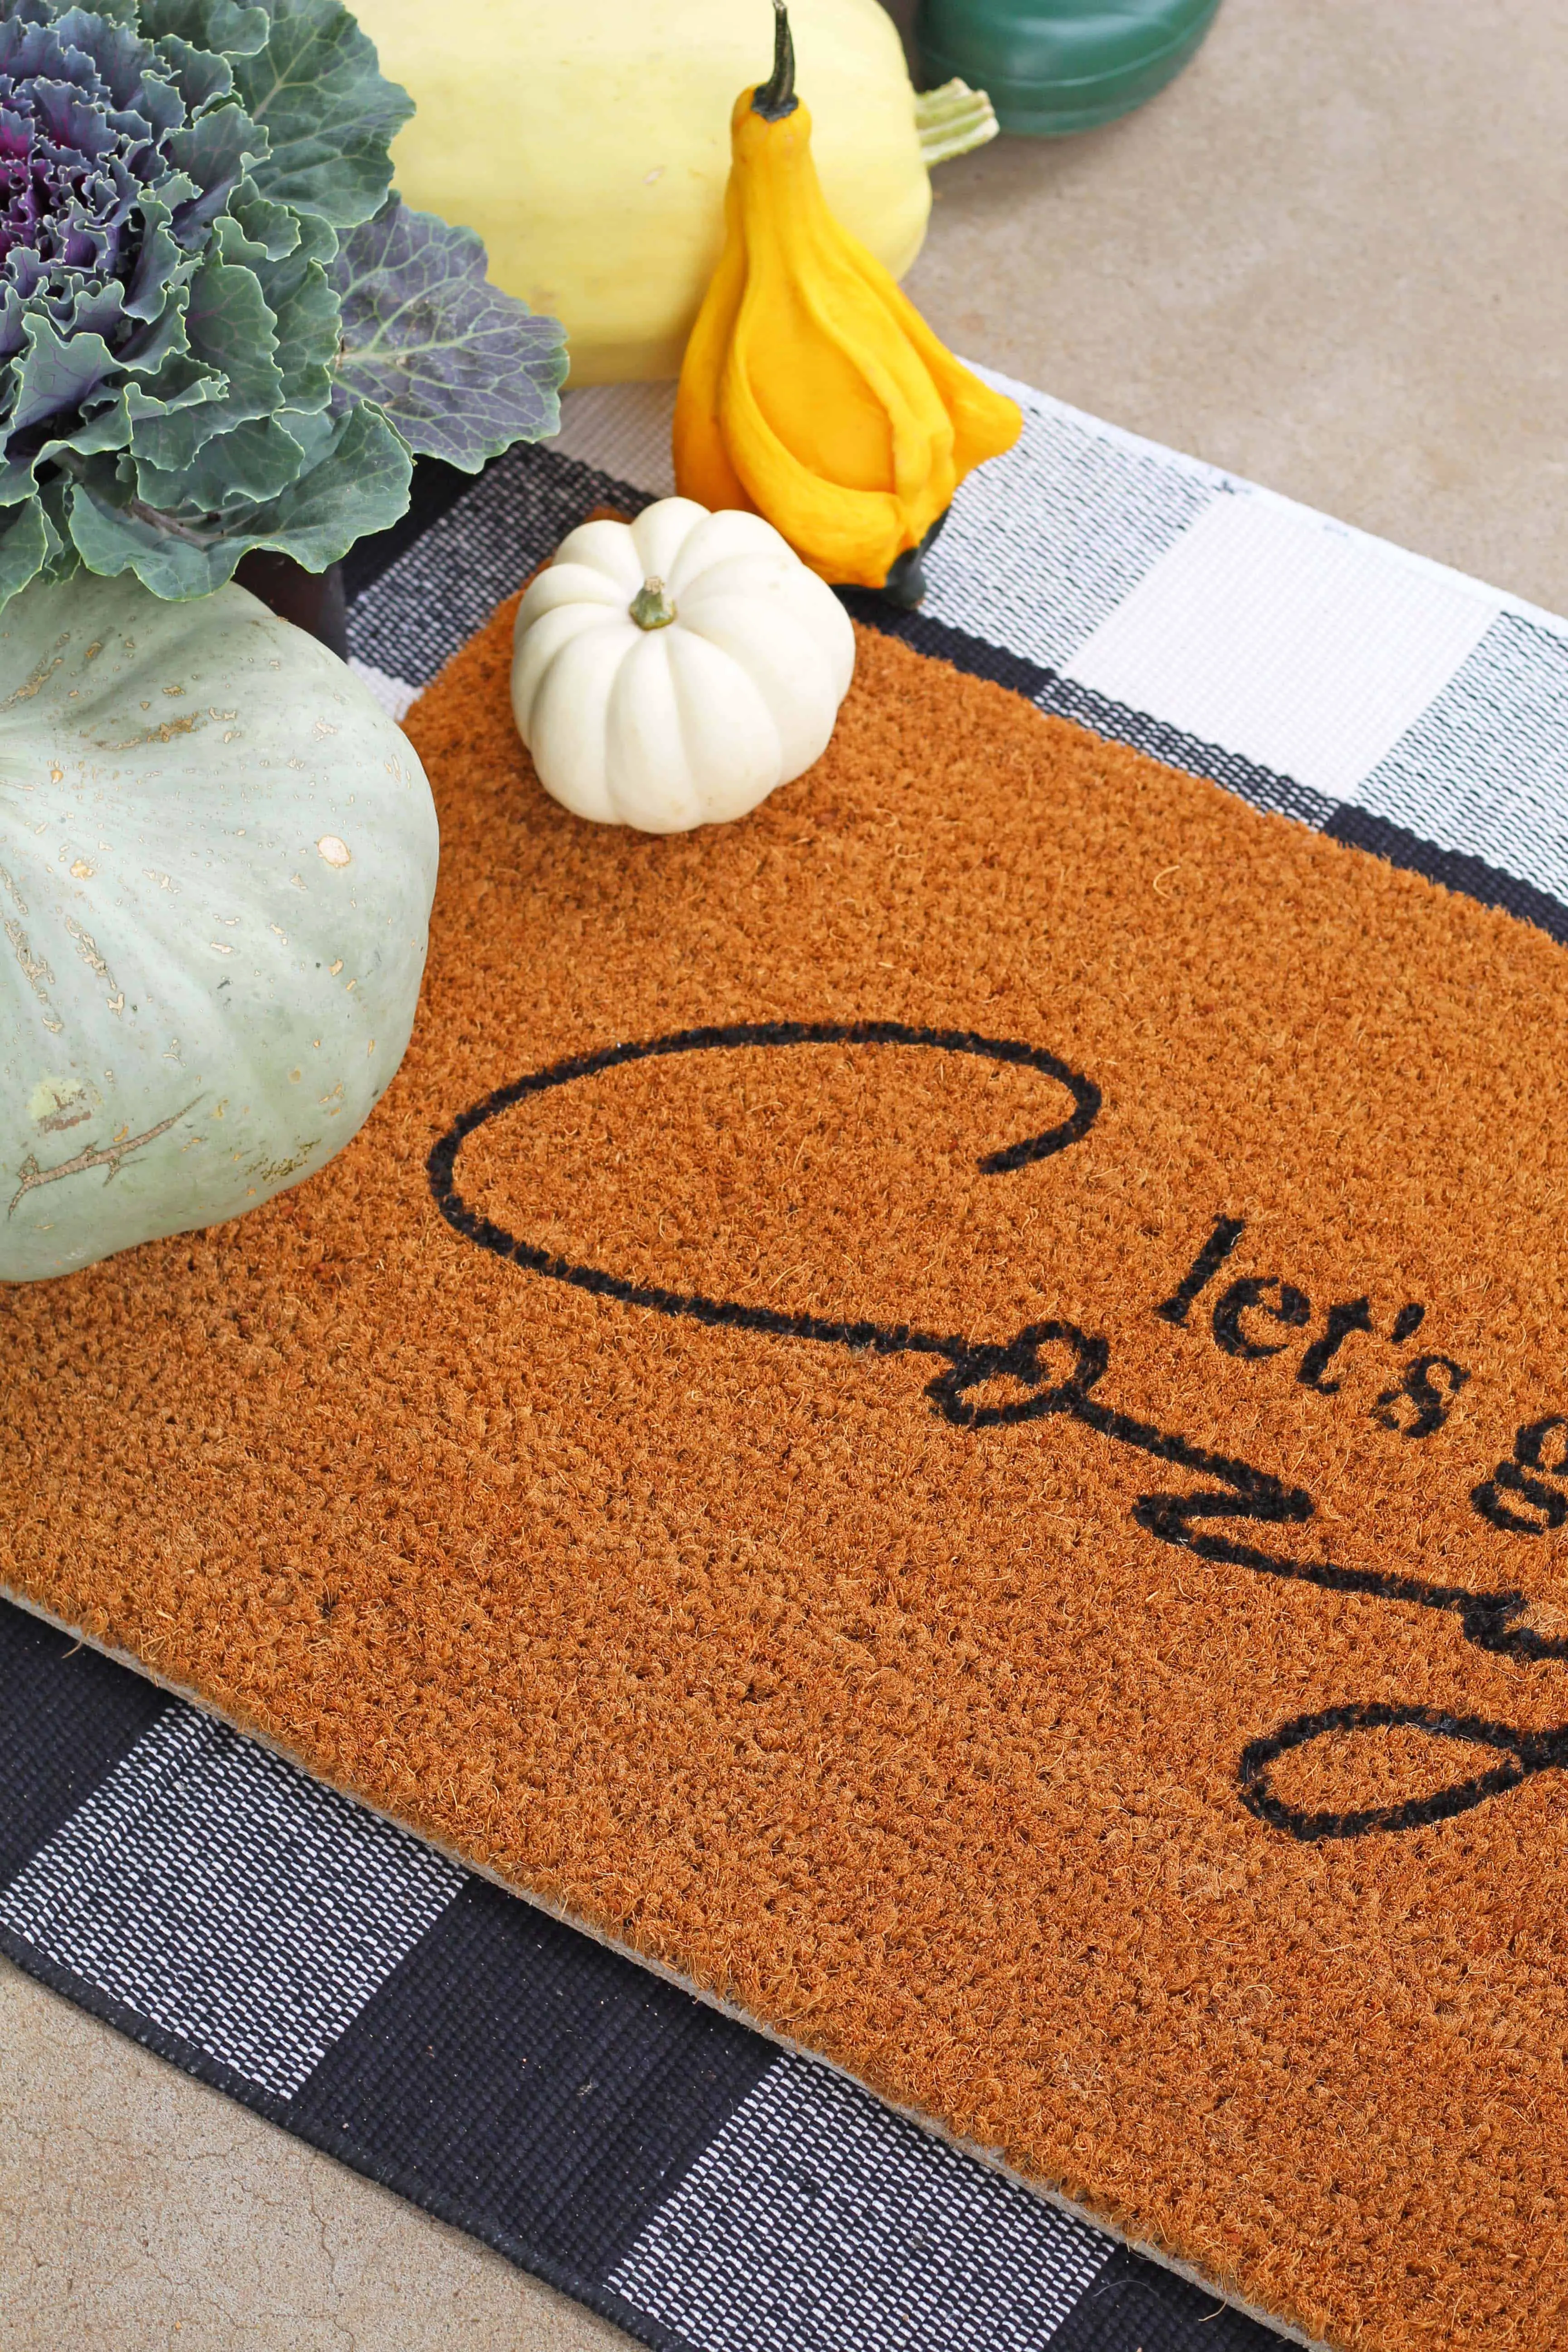 How to make your own stenciled doormat